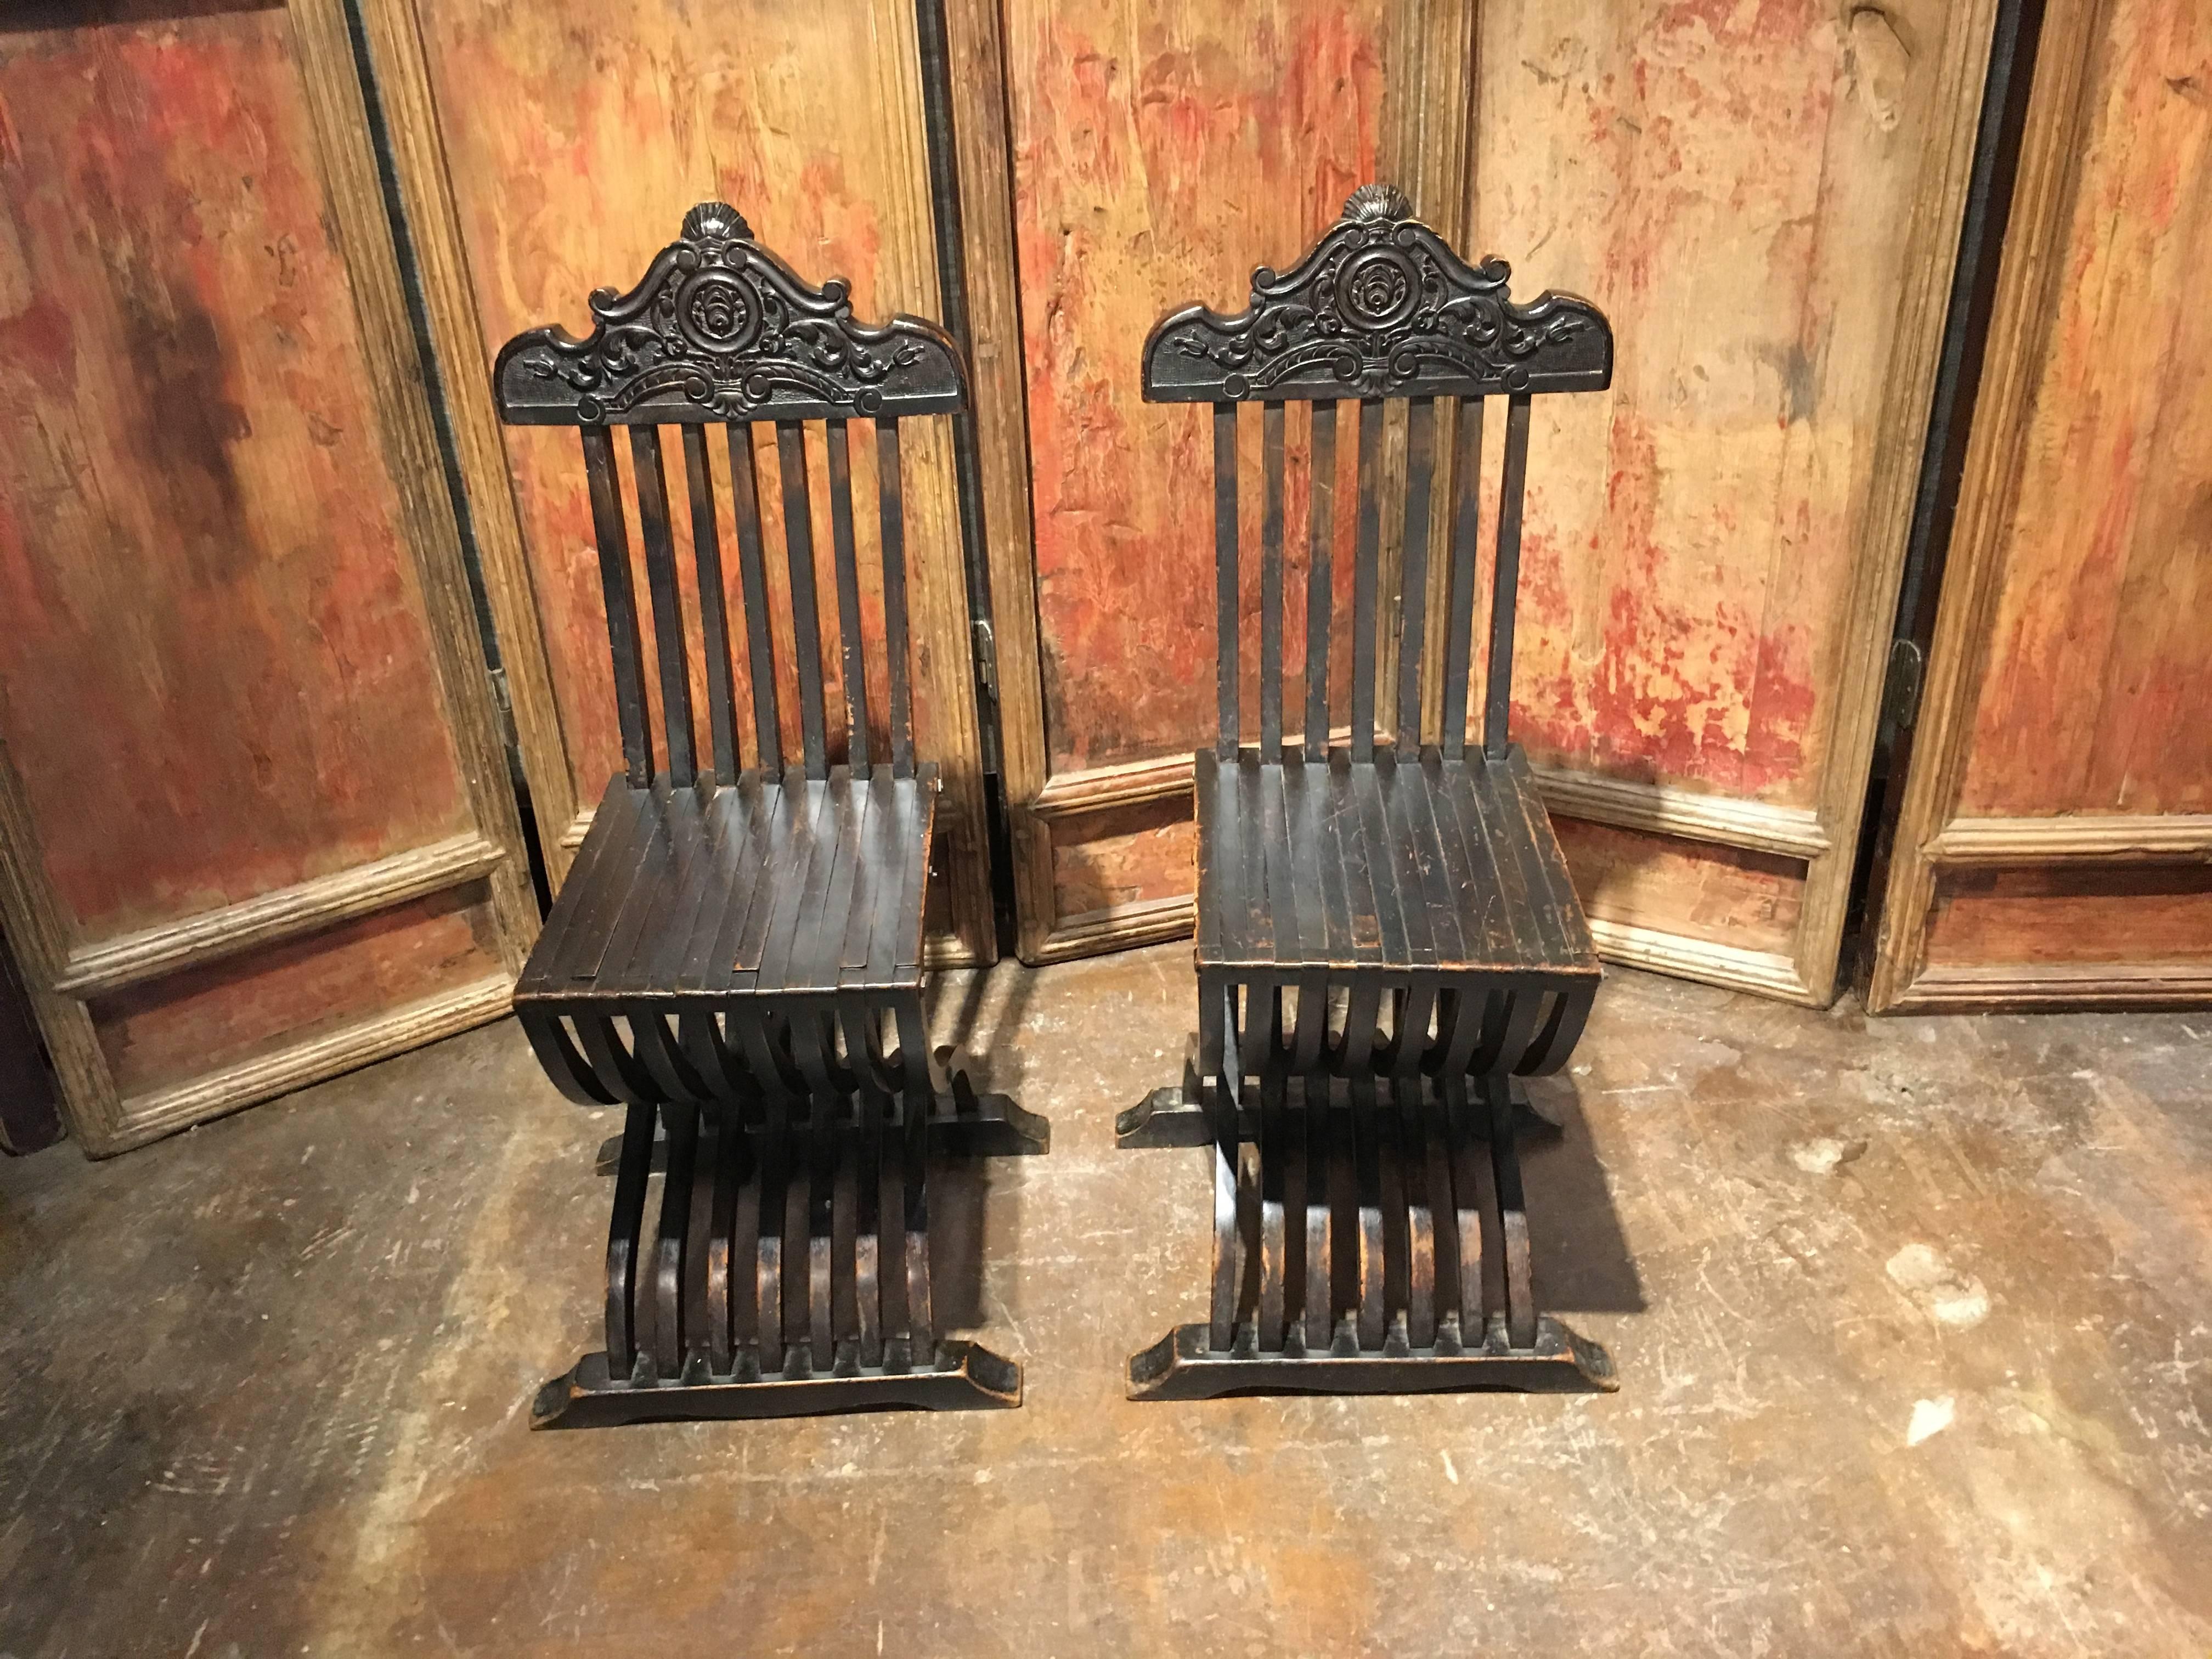 Hand-Carved Pair of Italian Renaissance Revival Side Chairs, 19th Century For Sale